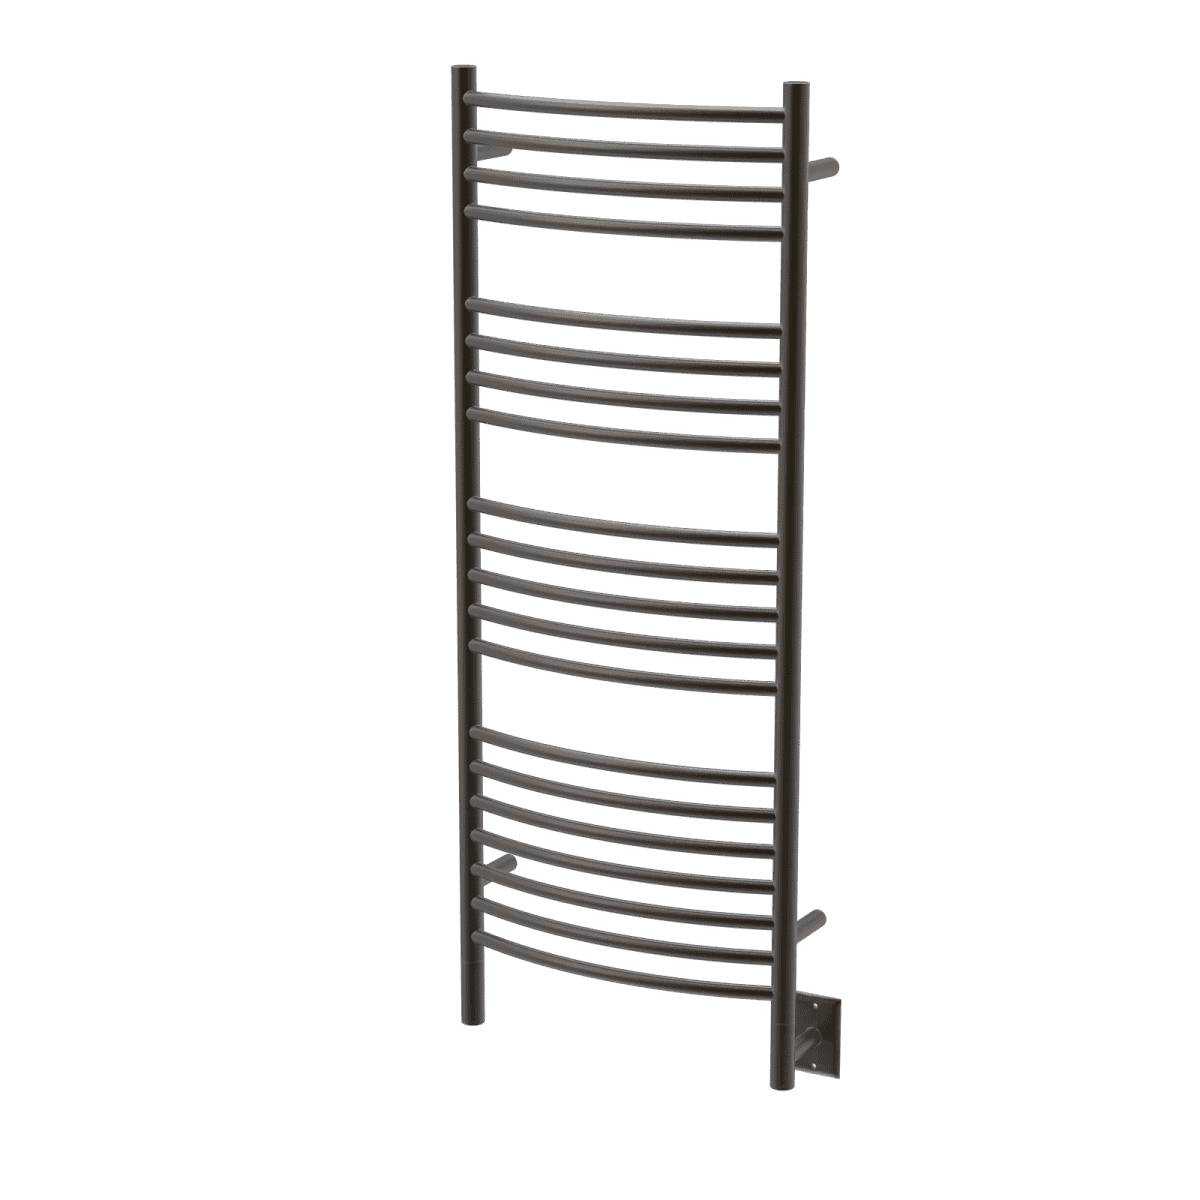 Amba DCO Model D Curved 20 Bar Hardwired Towel Warmer - Oil Rubbed Bronze